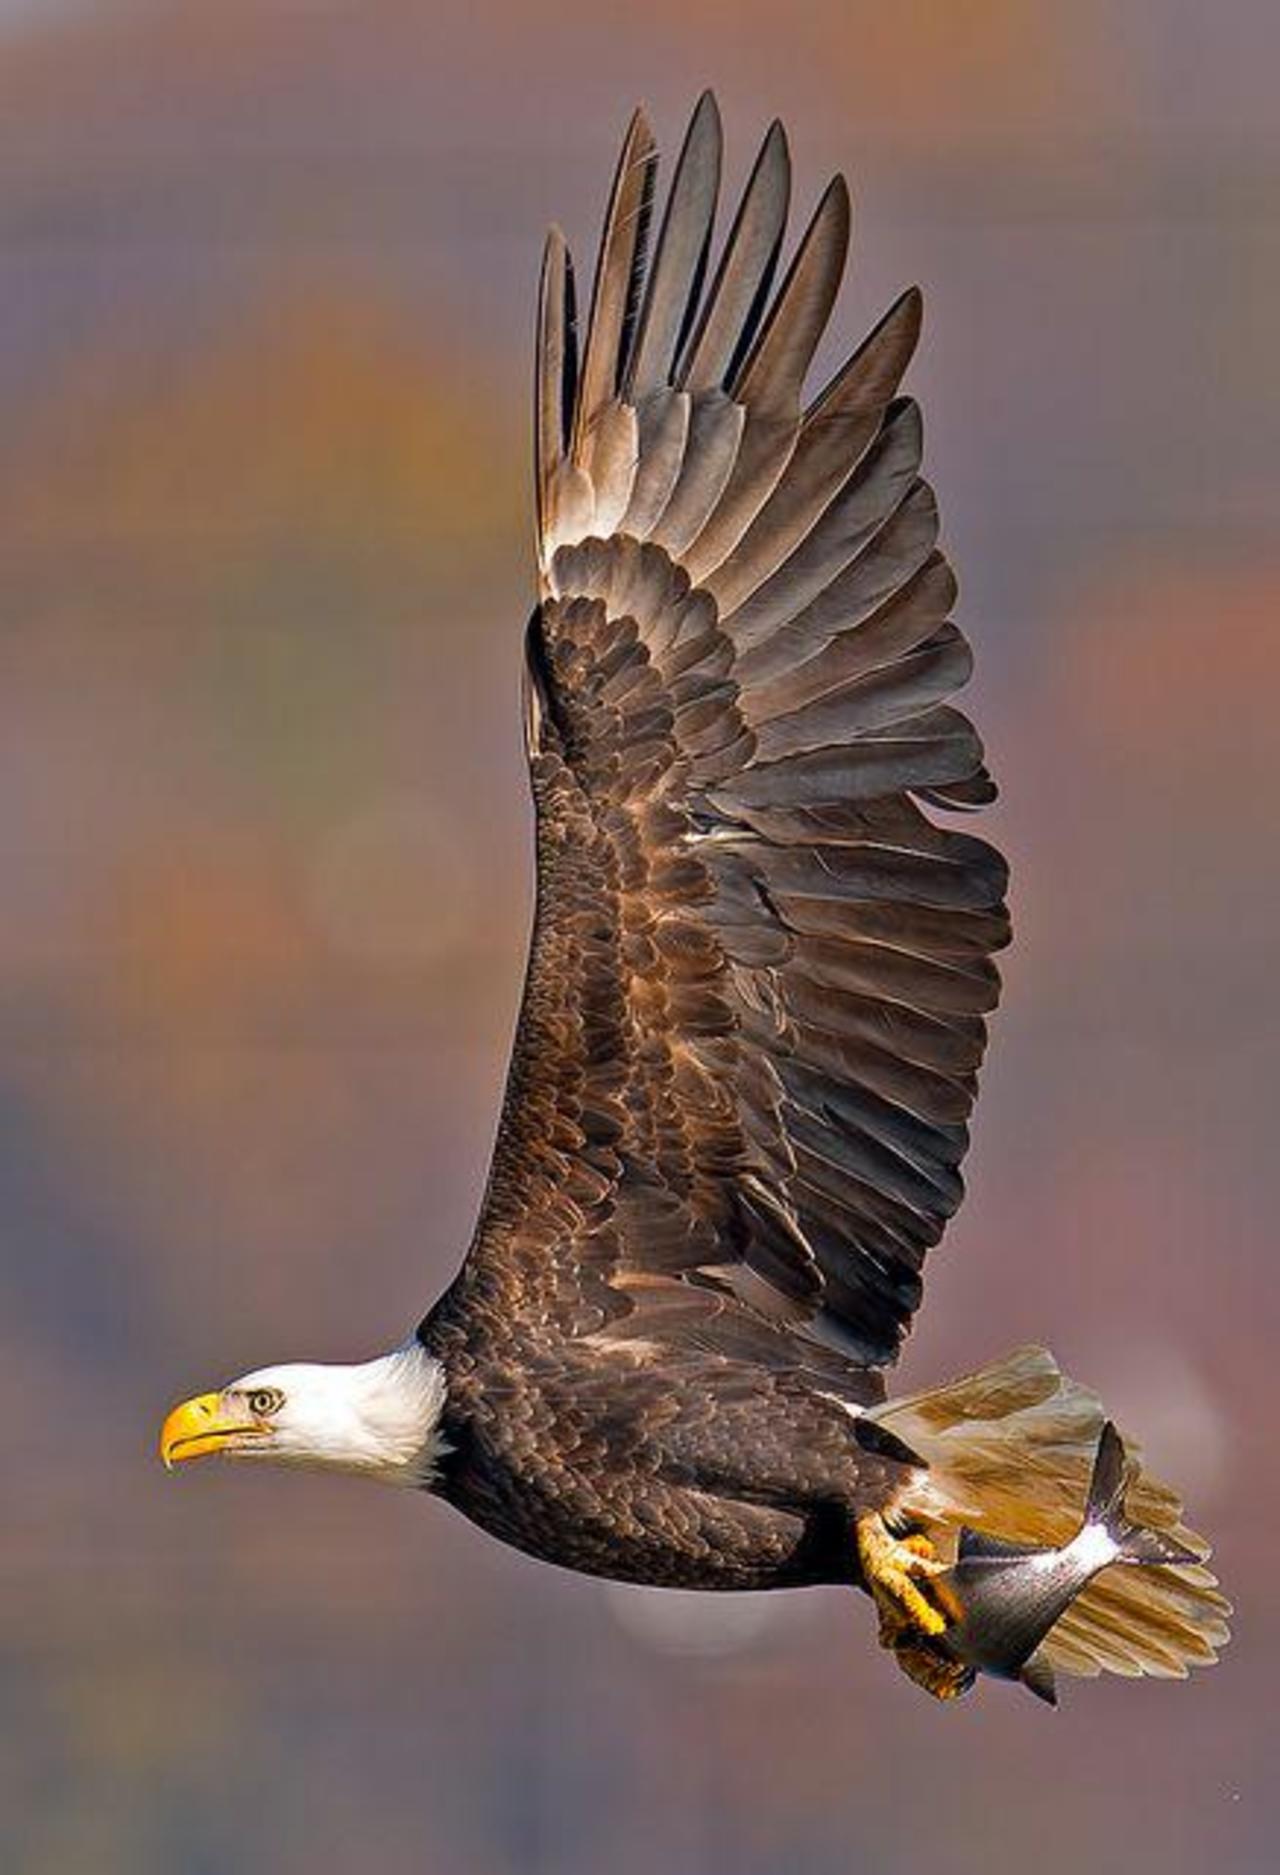 The Magnificent American Eagle http://t.co/cSRj1Tmmja c @t1956TN #nature #travel #photography #wildlife #birds